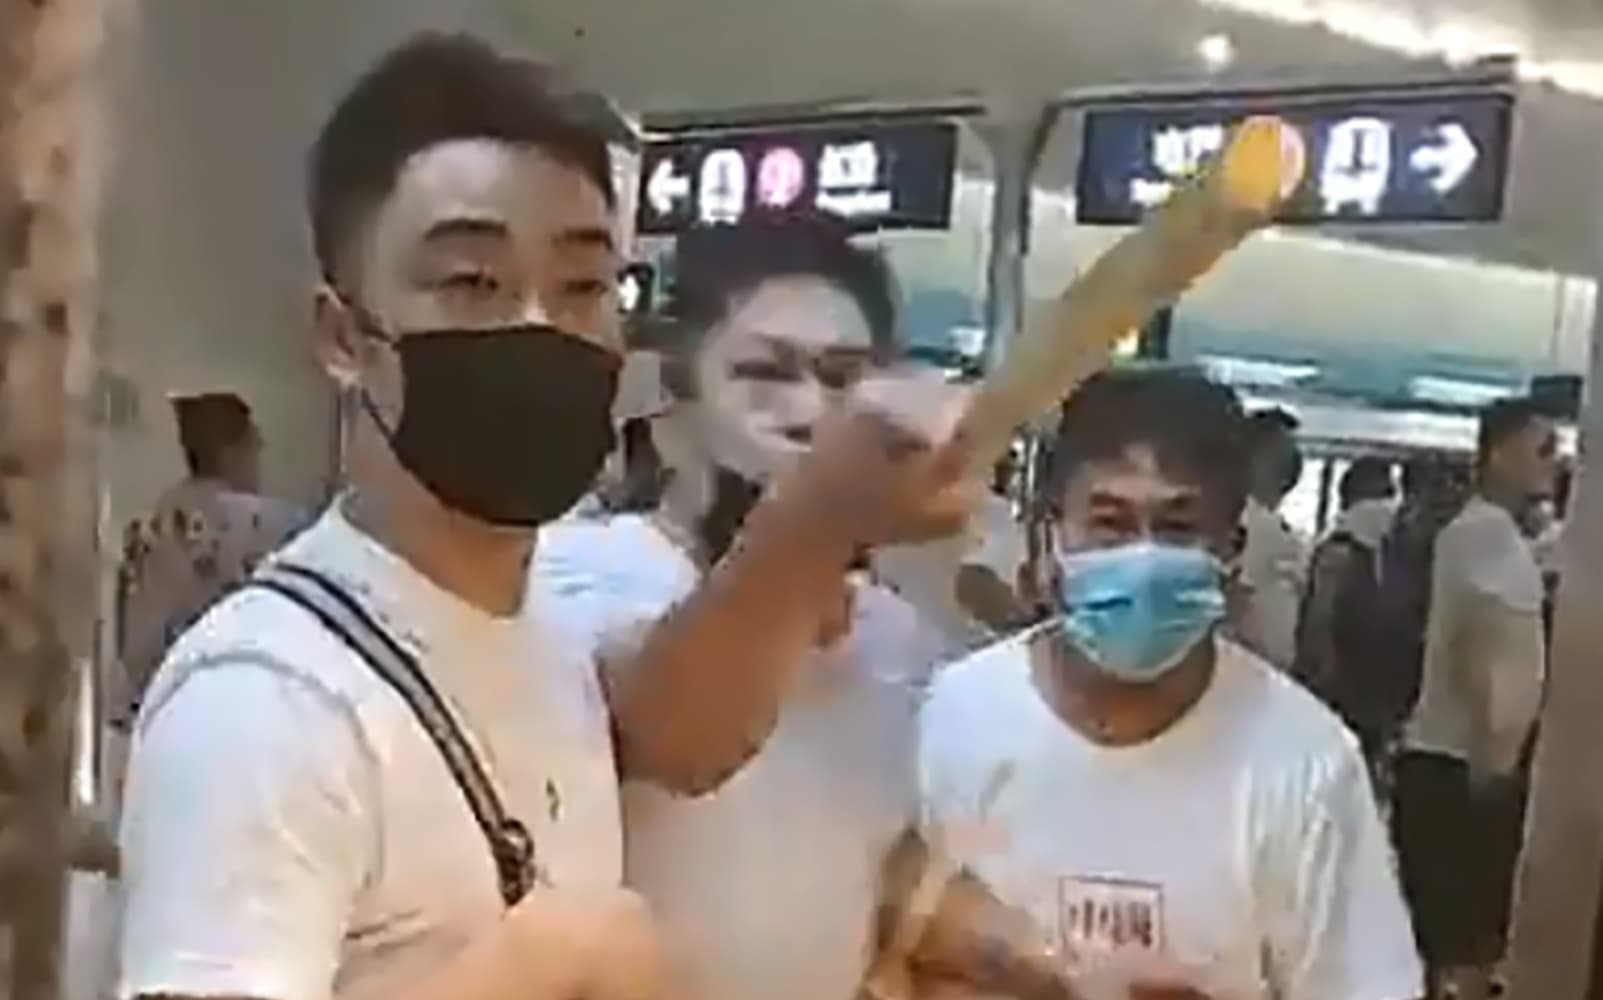 This frame grab taken from video recorded on July 21, 2019 shows a mob of men in white T-shirts threatening pro-democracy protesters (out of frame at R on train) at Yuen Long station in Hong Kong.